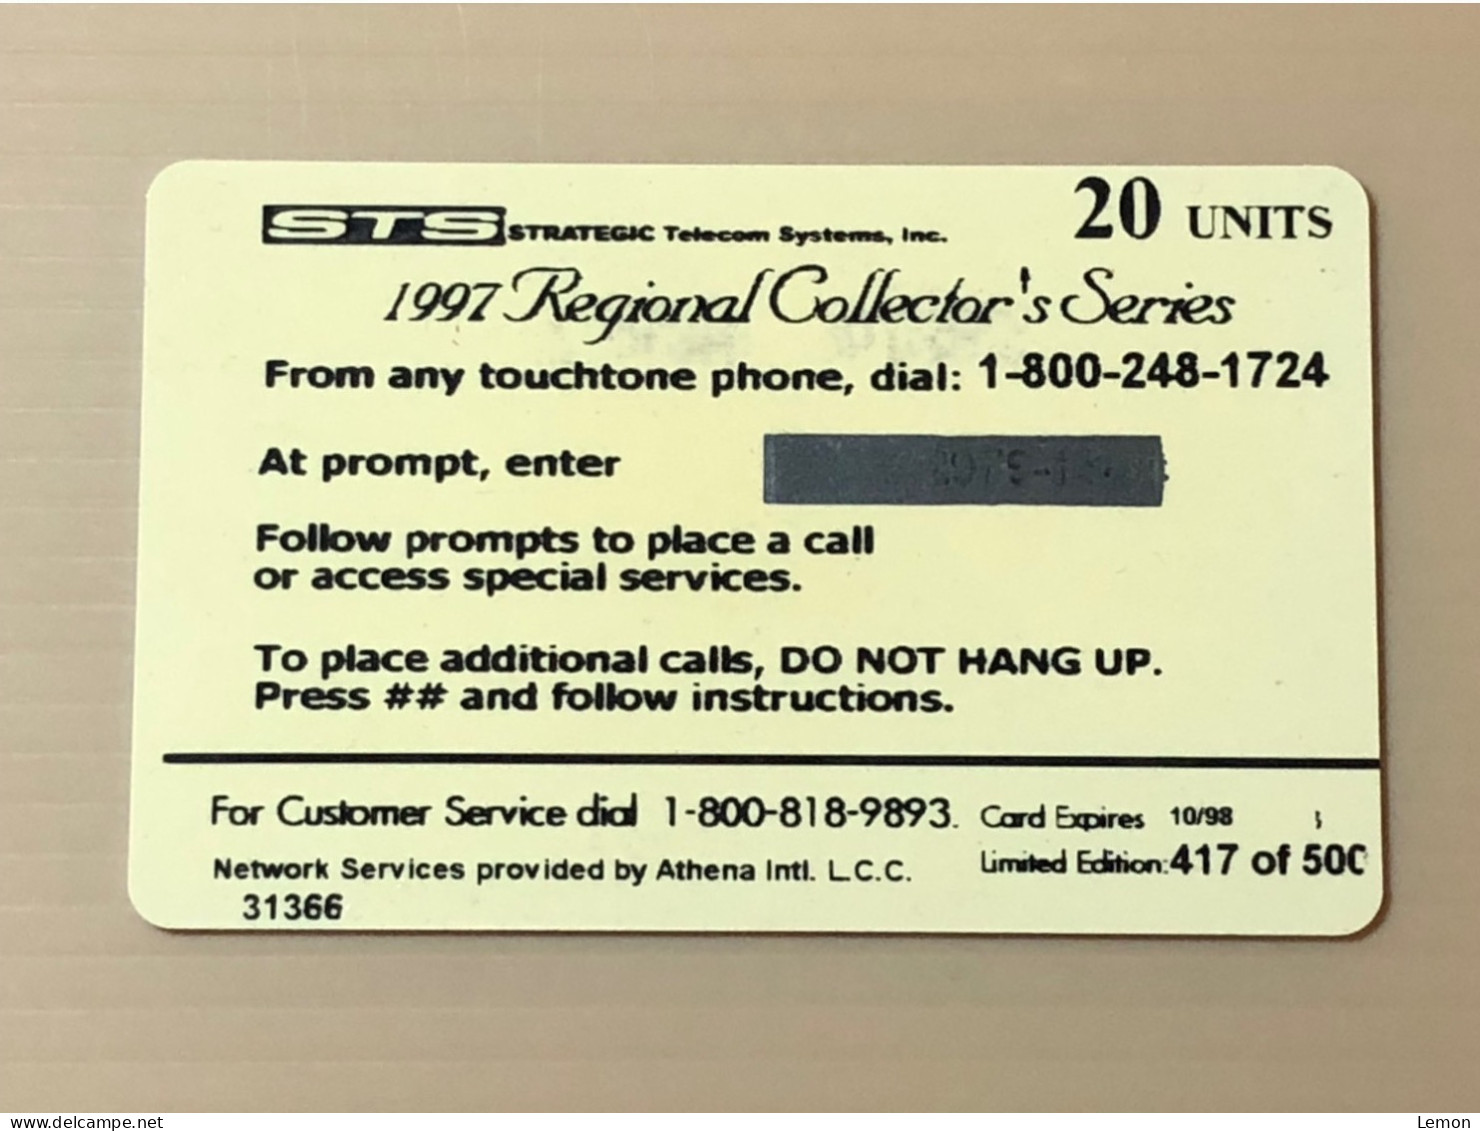 Mint USA UNITED STATES America Prepaid Telecard Phonecard, MILWAUKEE 97 (500EX), Set Of 1 Mint Card - Collections